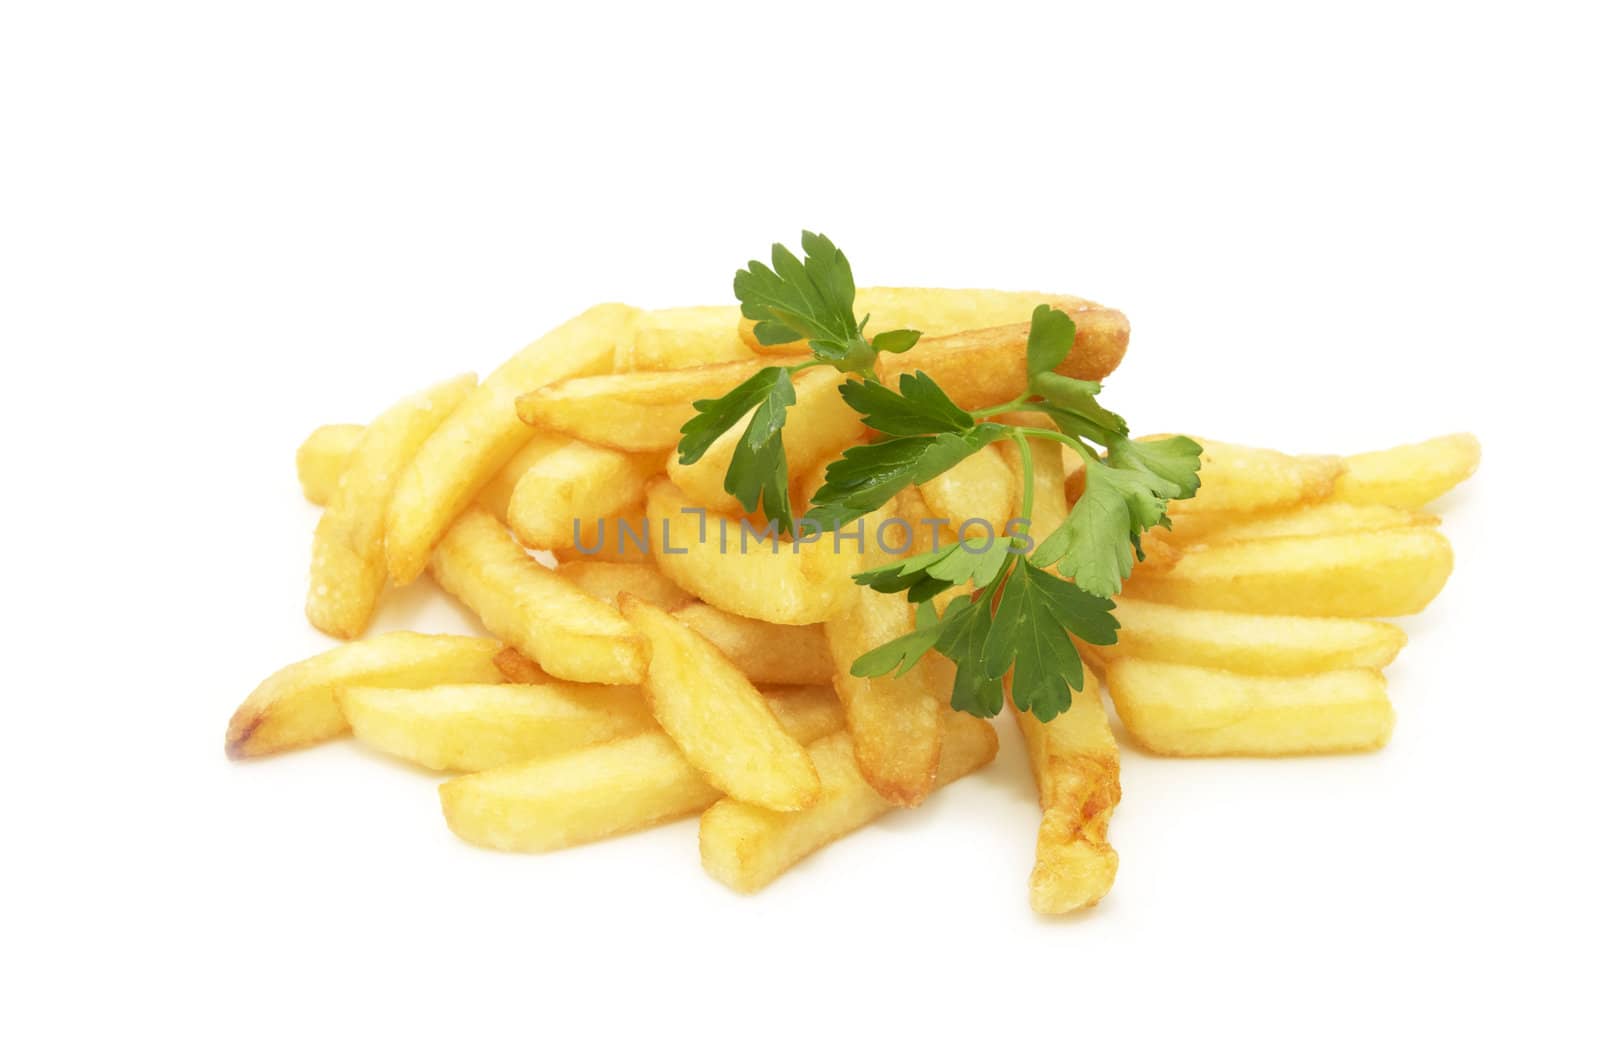 roasted potatoes with herbs on a white background